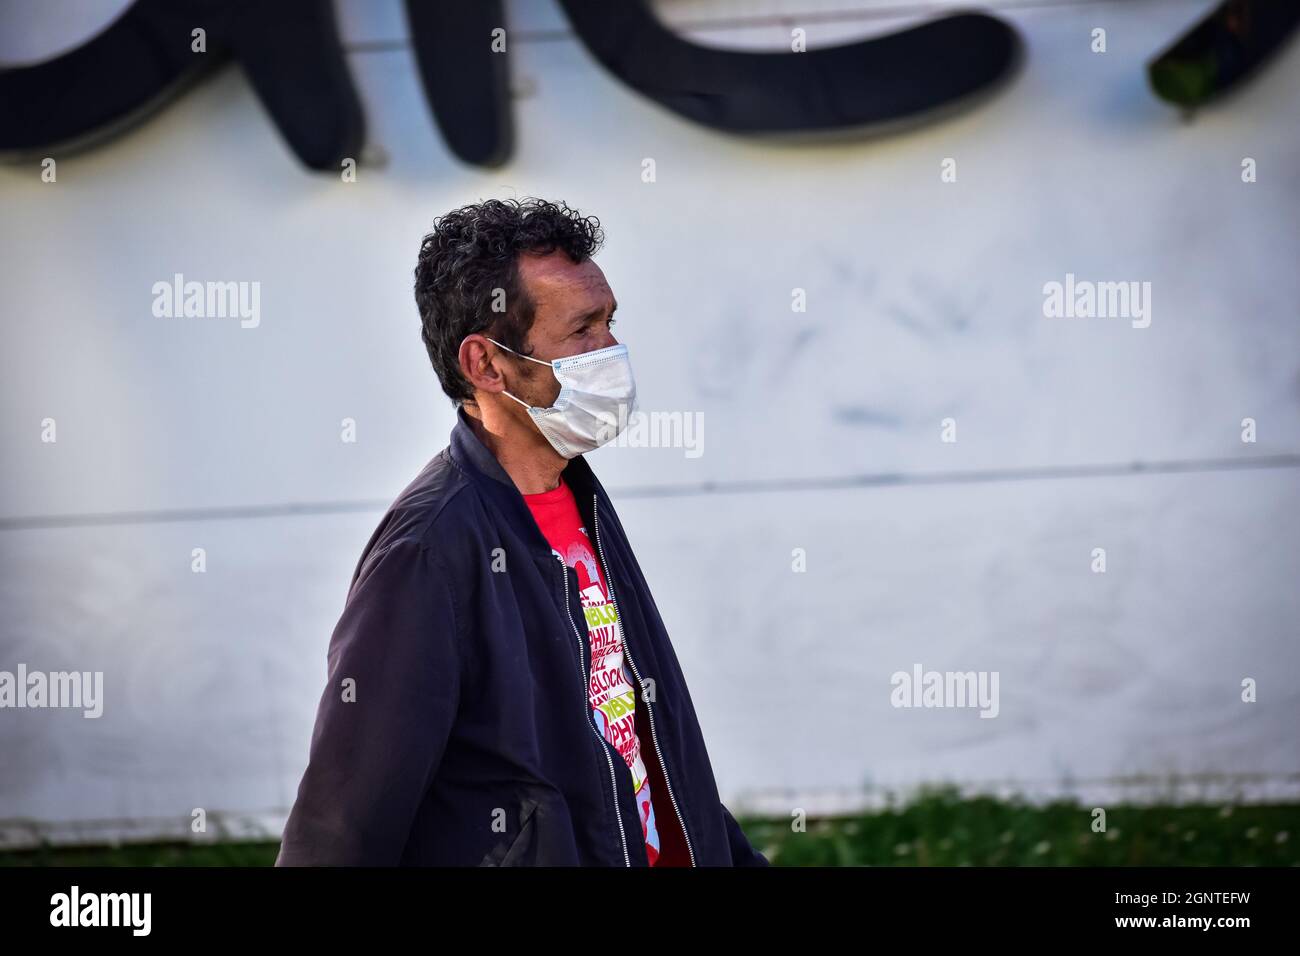 A men walks by wearing protective face masks against the COVID-19 Pandemic in Cumbal - Nariño, Colombia on August 8, 2021. Stock Photo